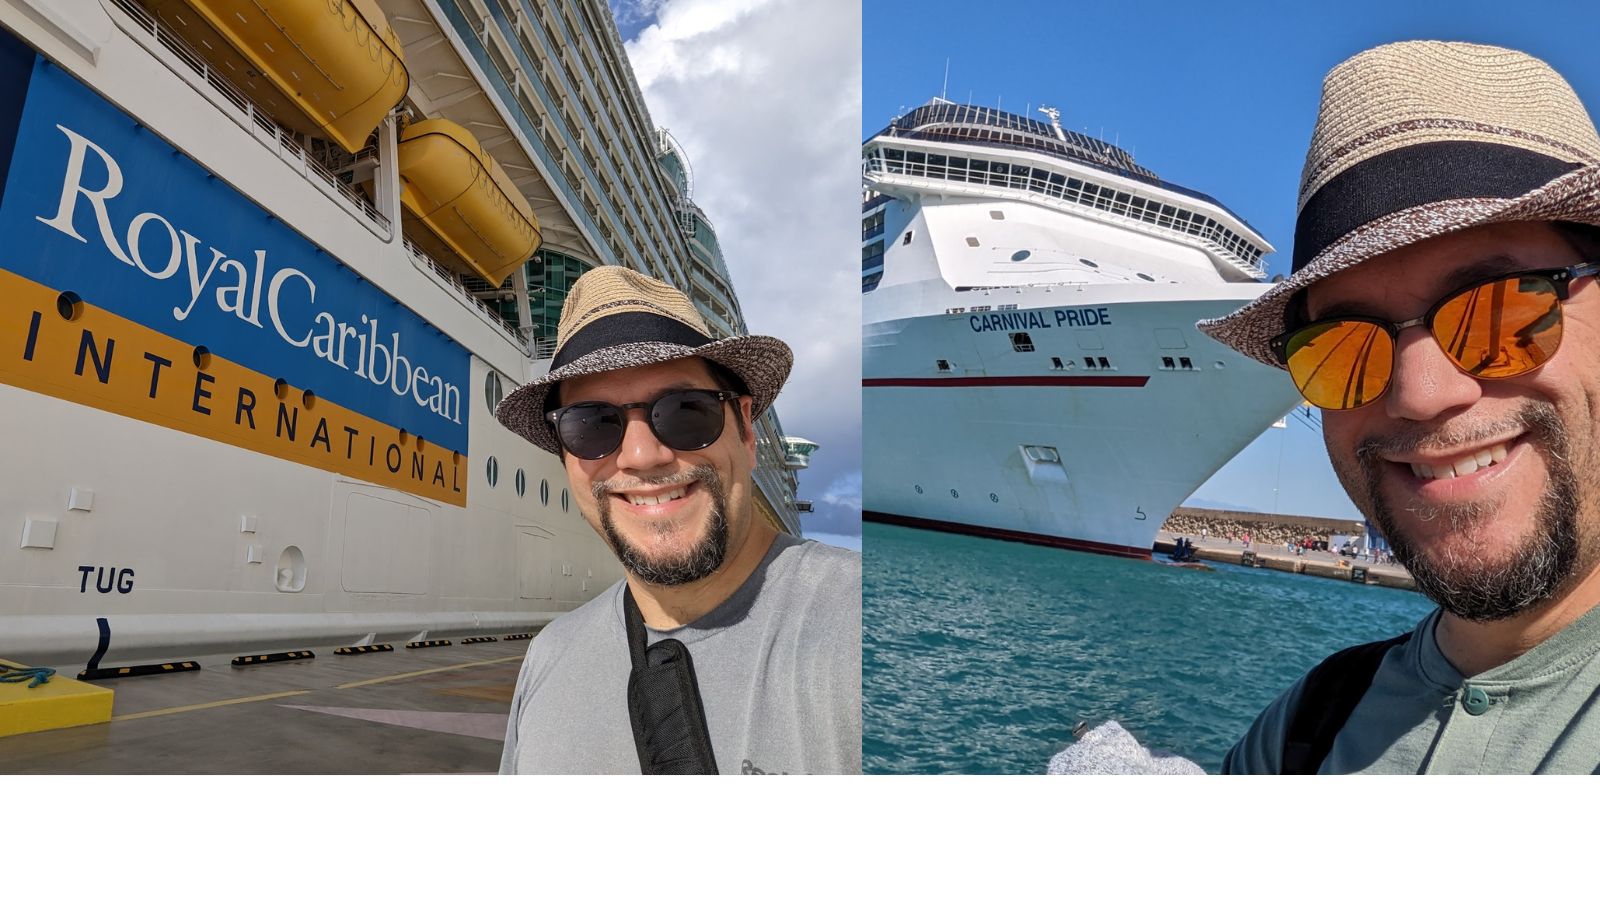 a man taking a selfie in front of a cruise ship